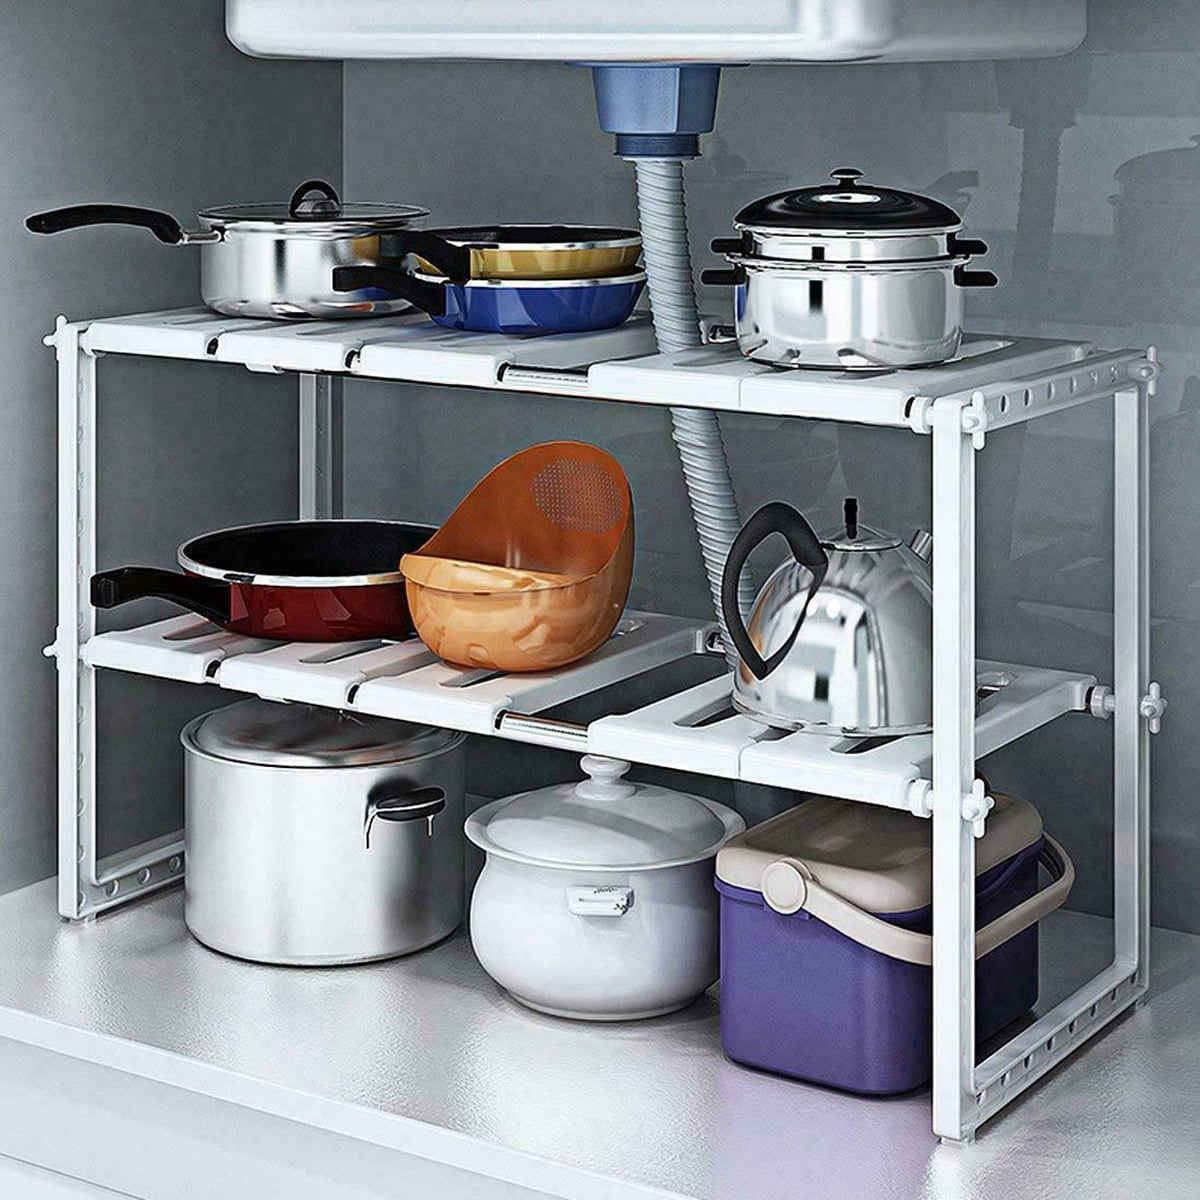 2 Tier Expandable Shelf Under Sink Organizer Storage Rack for Bathroom Strong Waterproof Shelf Kitchen Expand from 15 x 10 inch to 26 x 10inch 